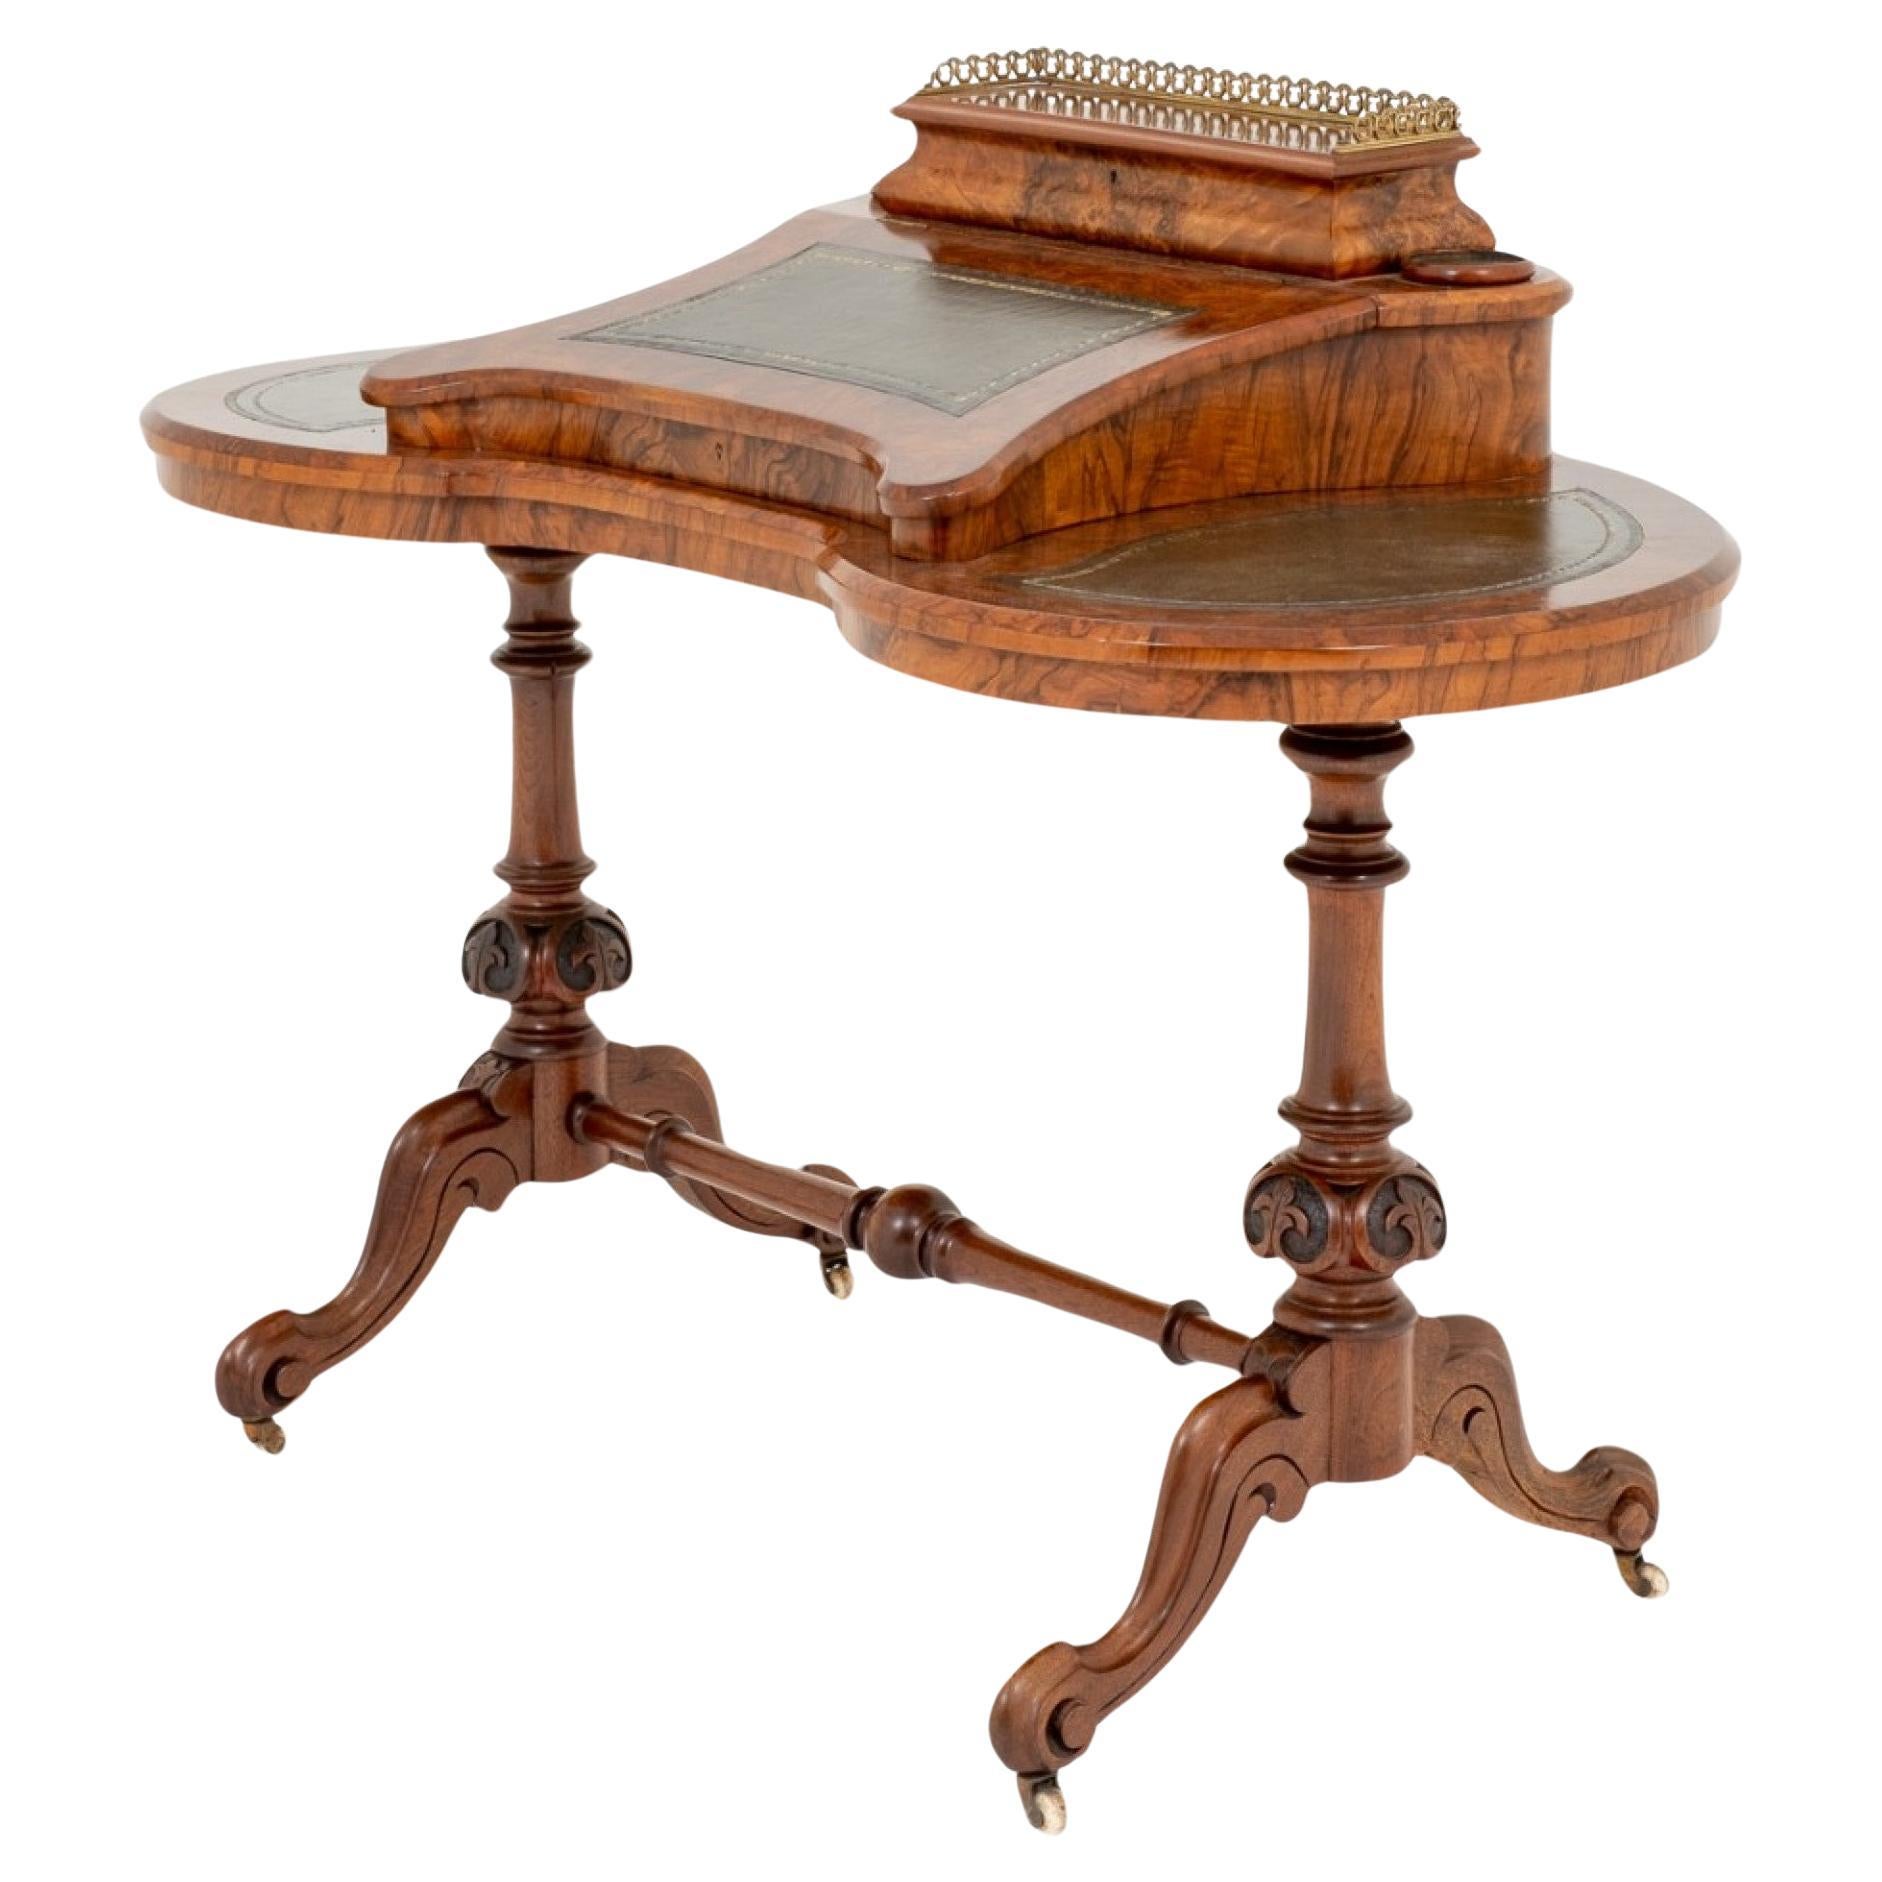 Victorian Desk - Walnut Shaped Writing Table Circa 1860 For Sale